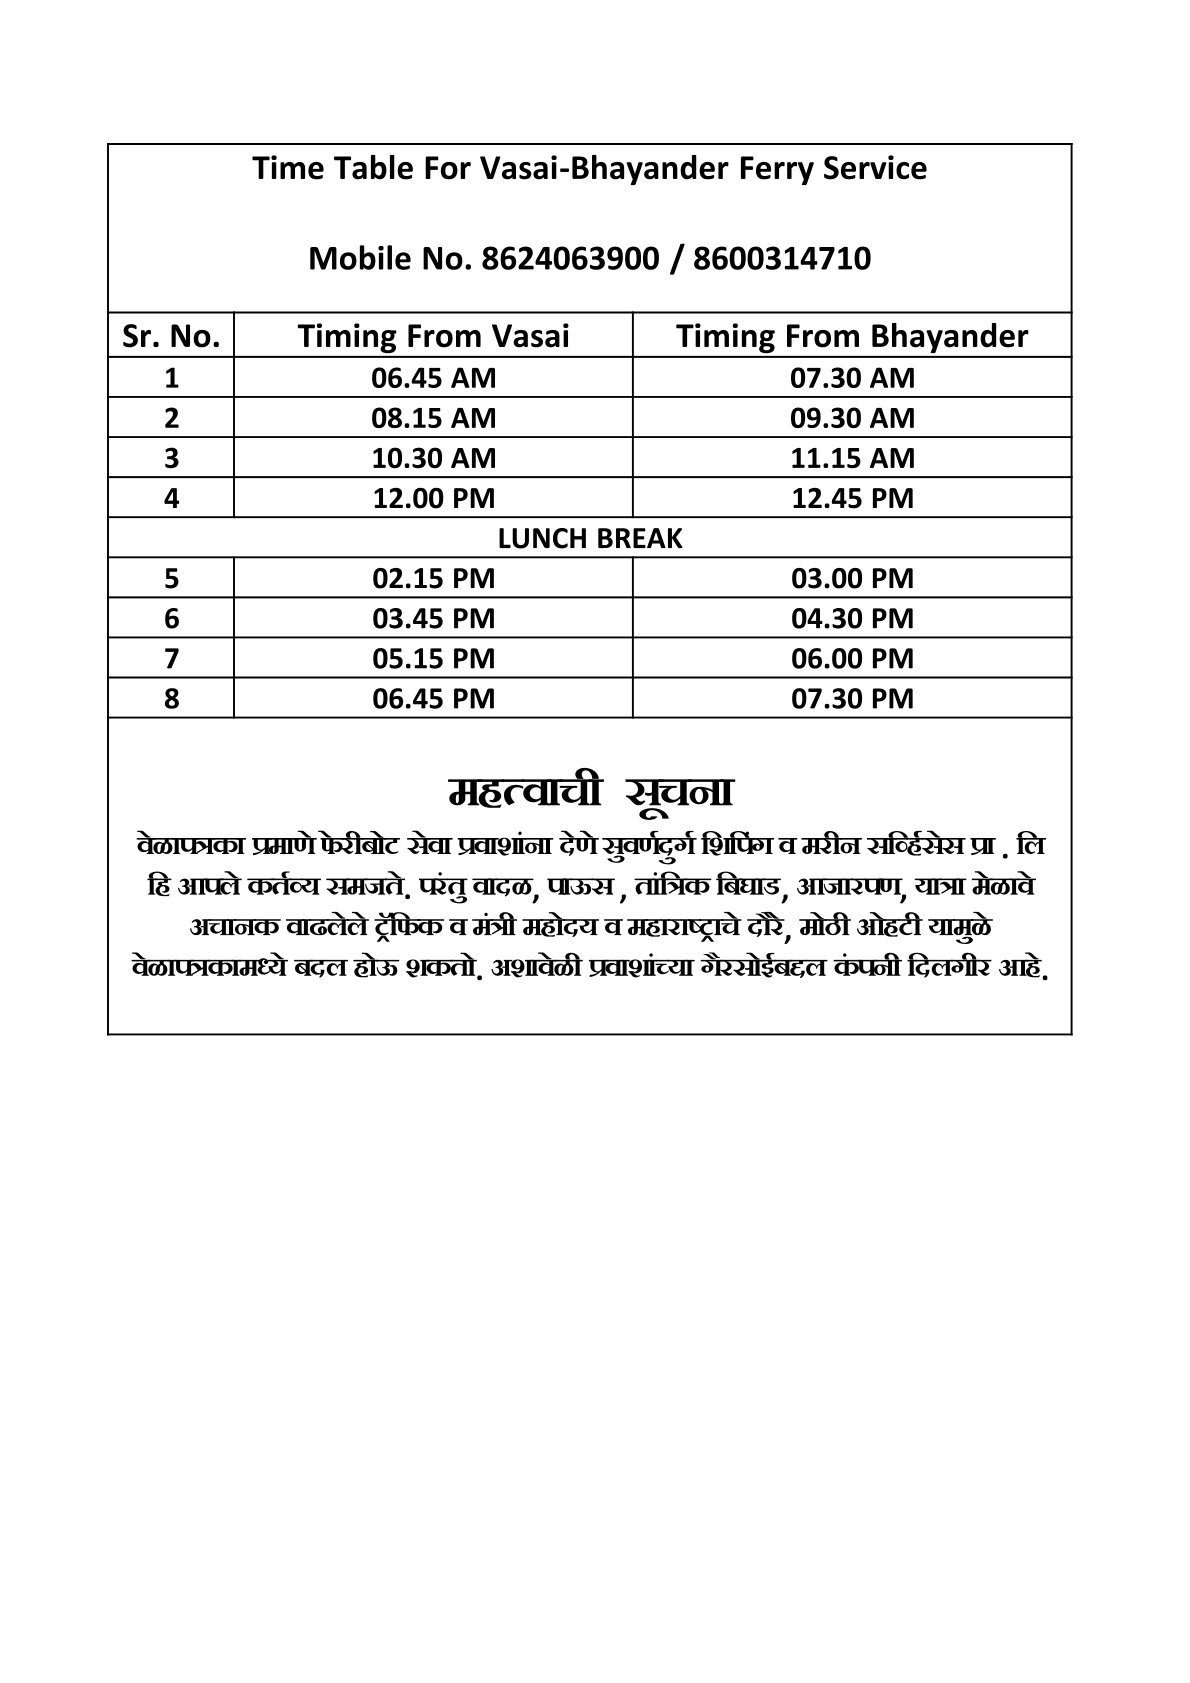 Ambet Ferry Time Table